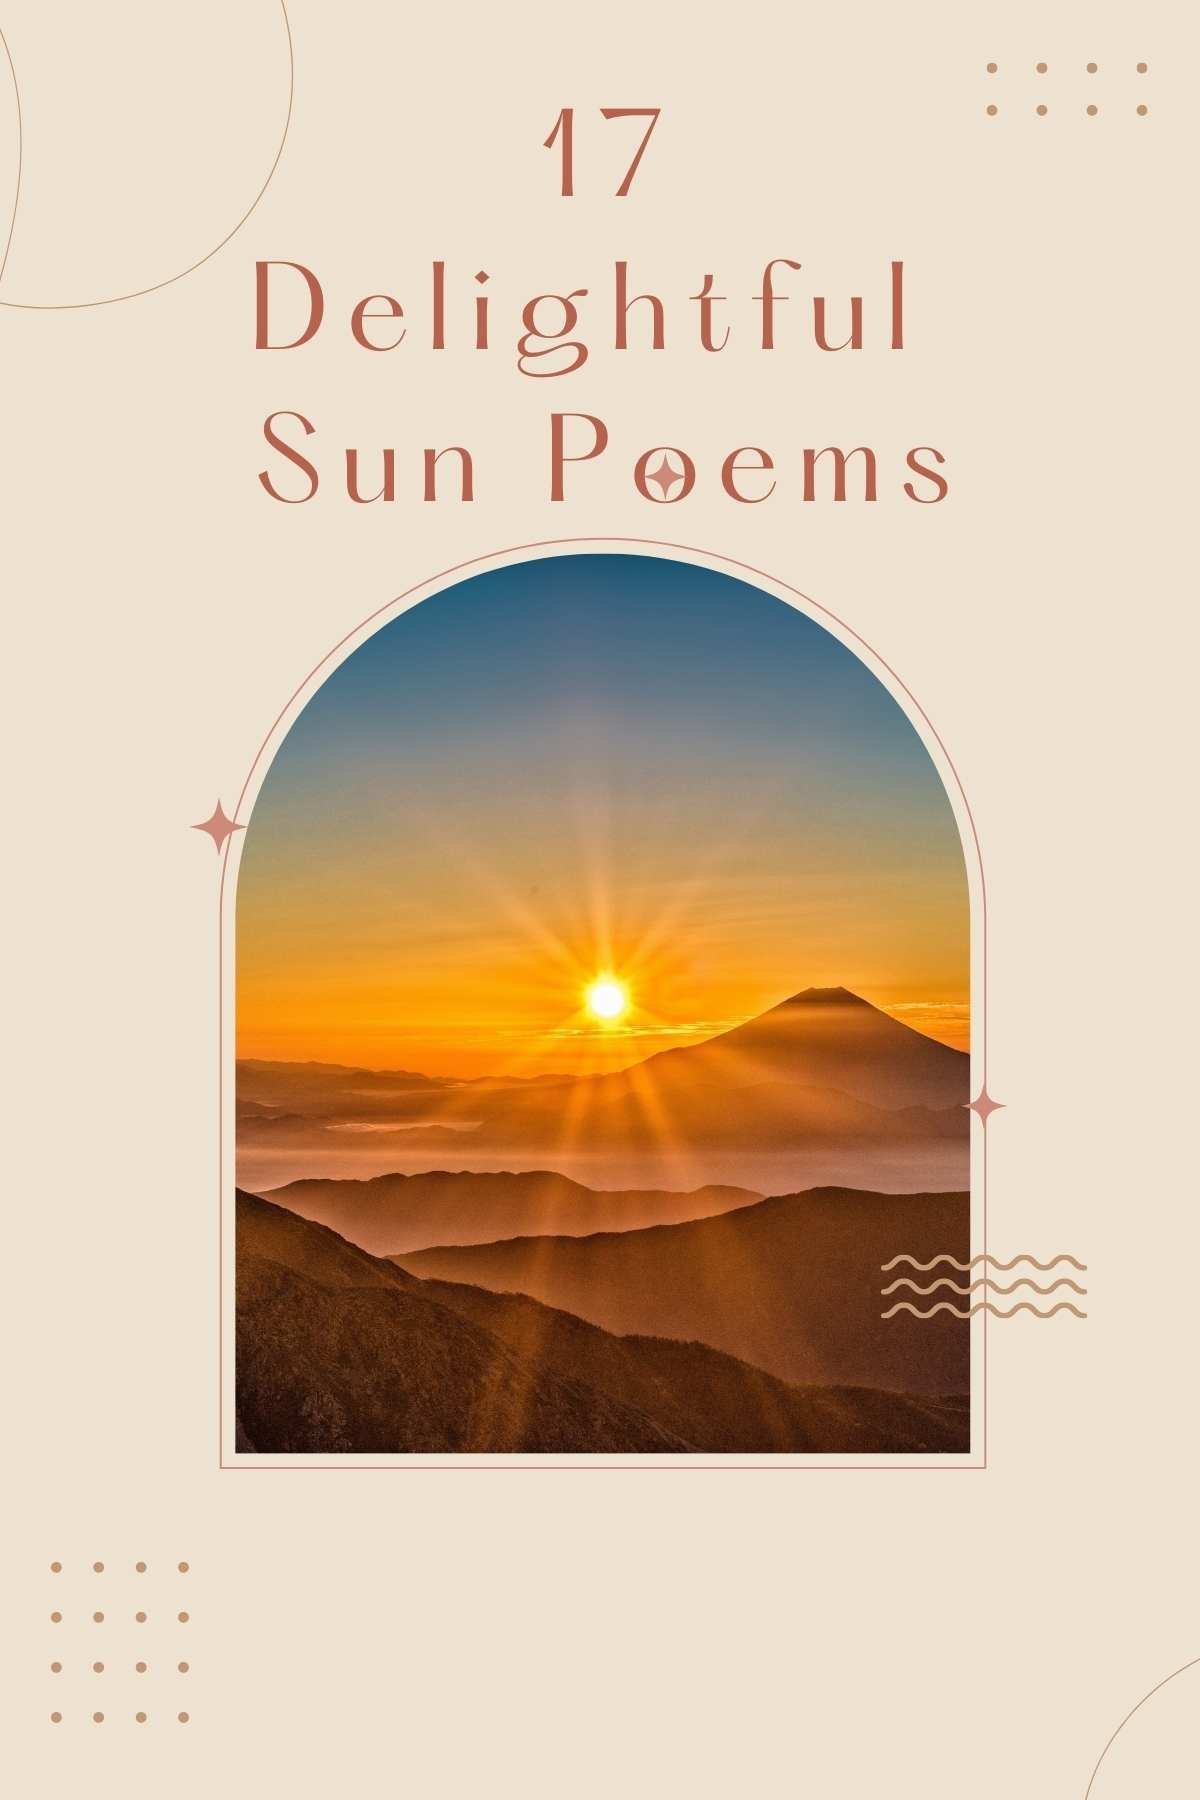 Poems about the sun